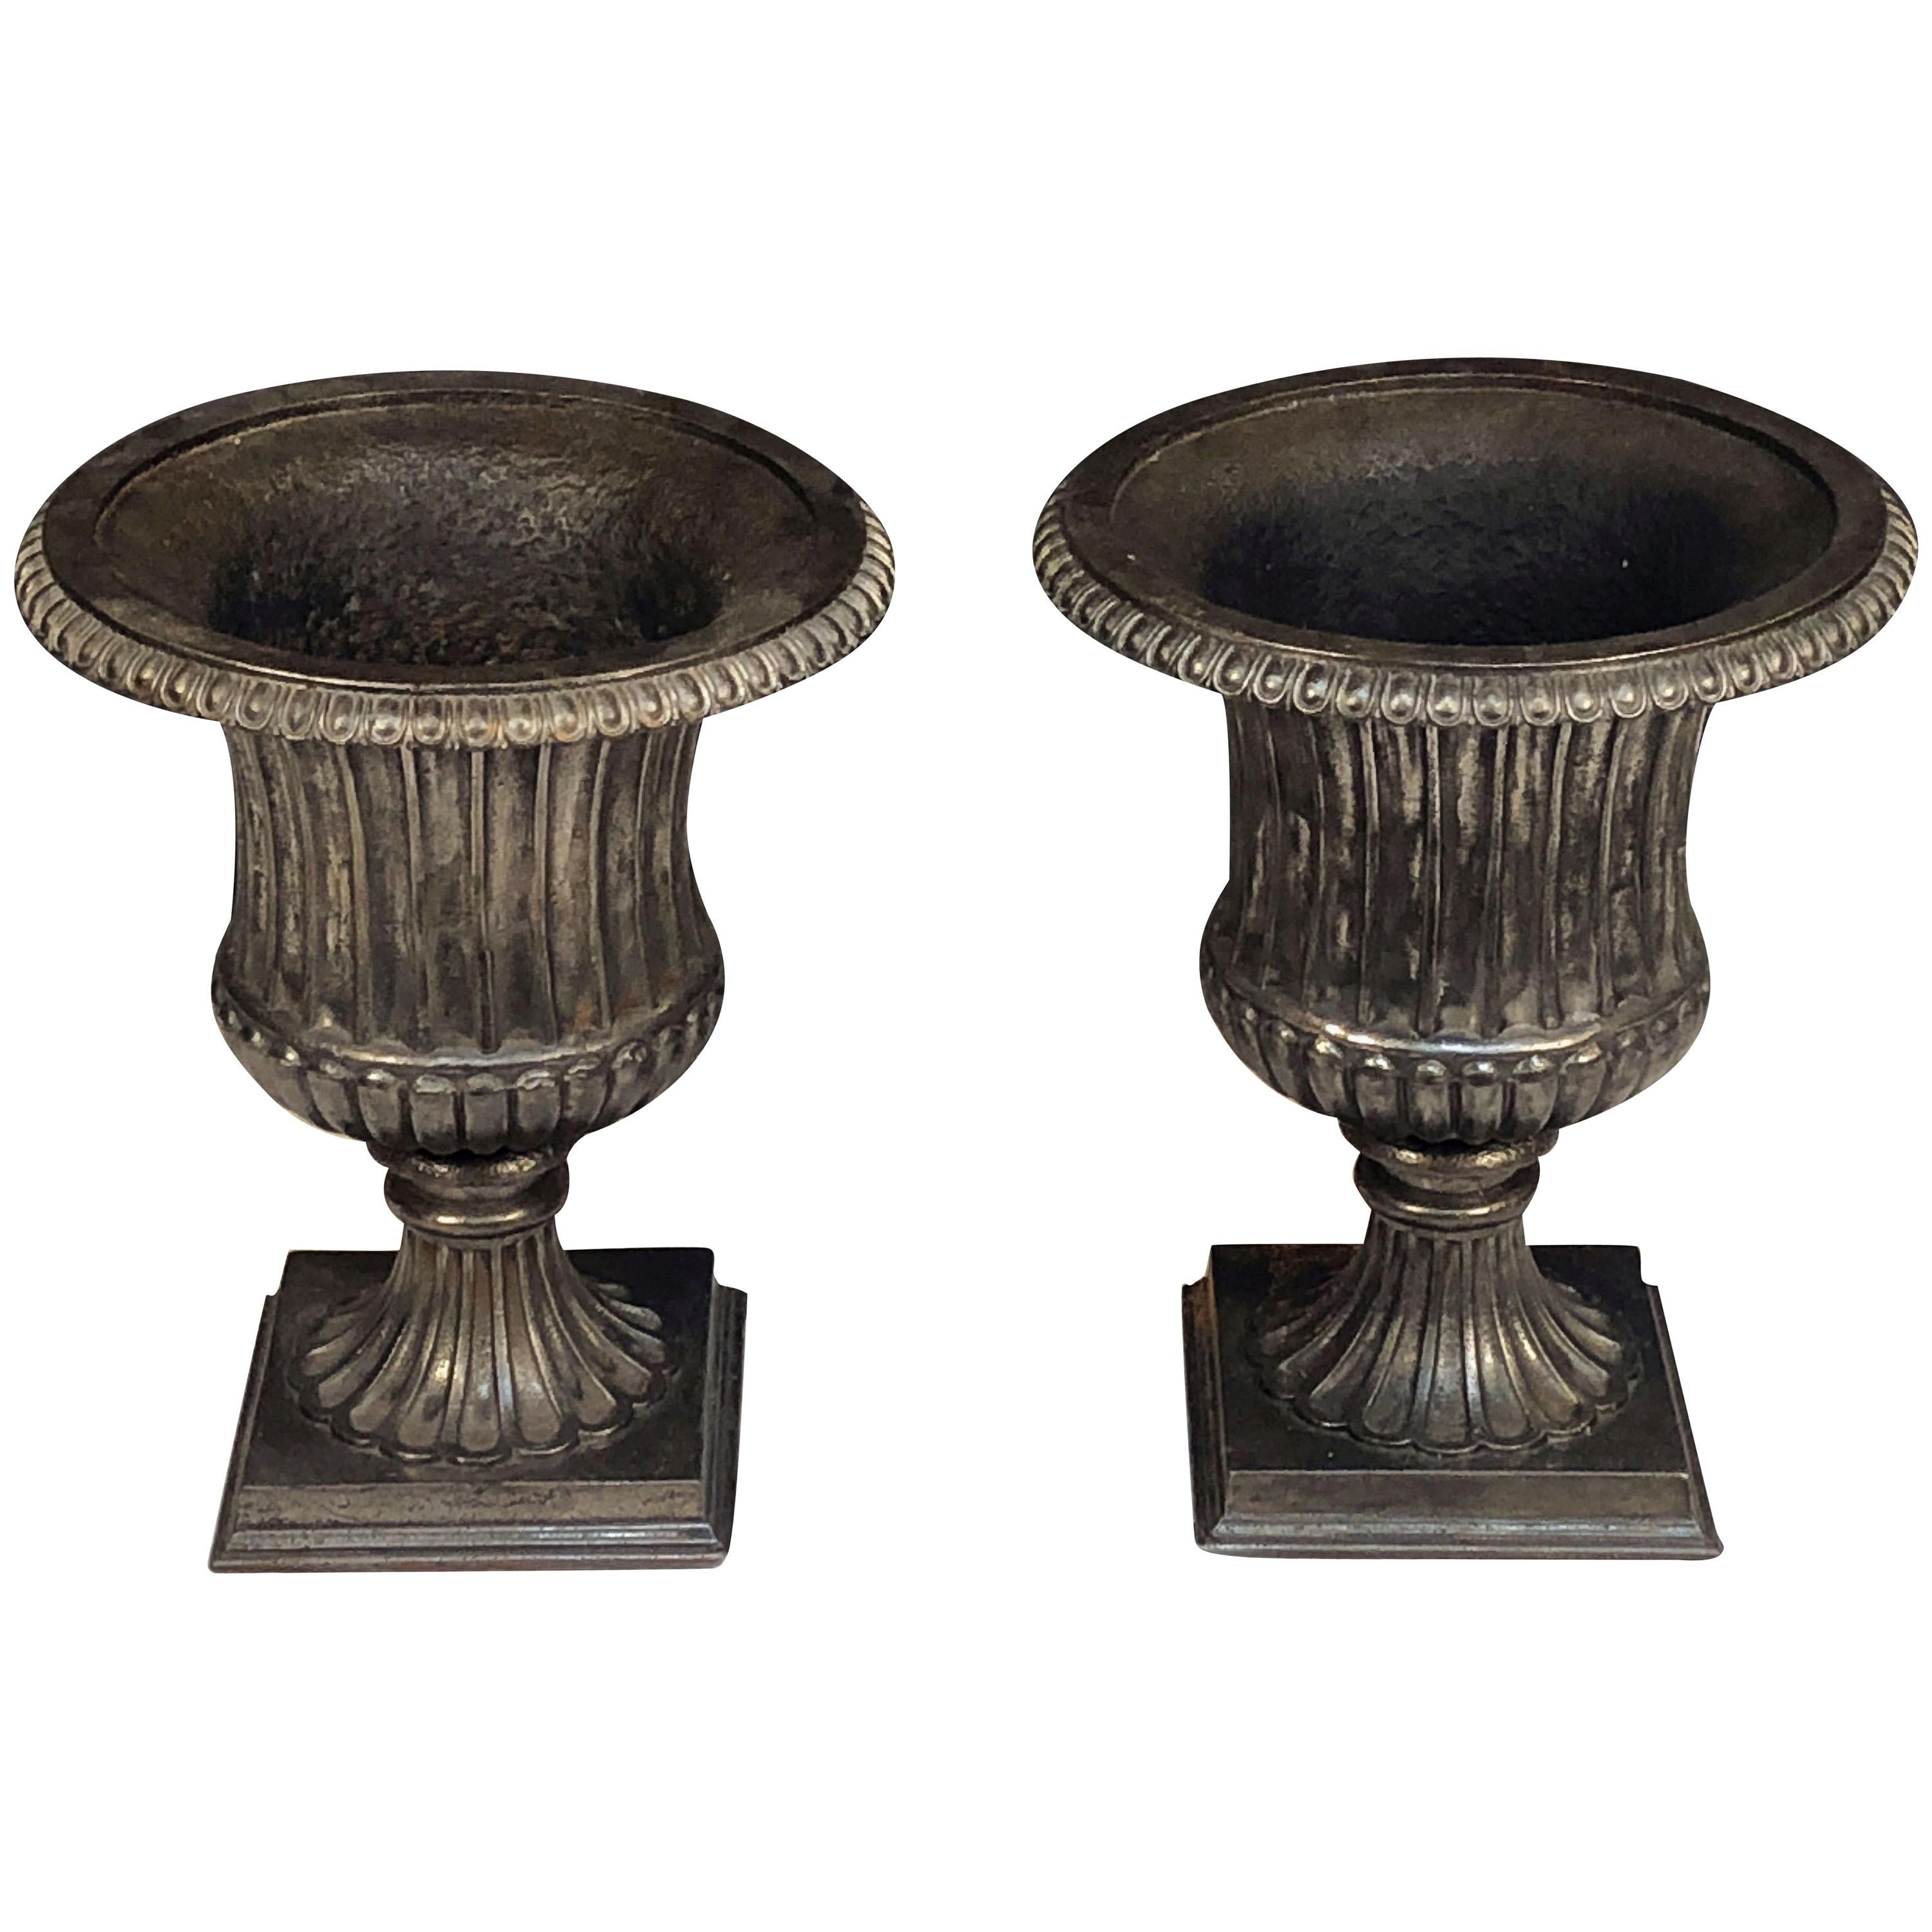 English Garden Urns of Cast Iron with Pewter Finish, 'Individually Priced'